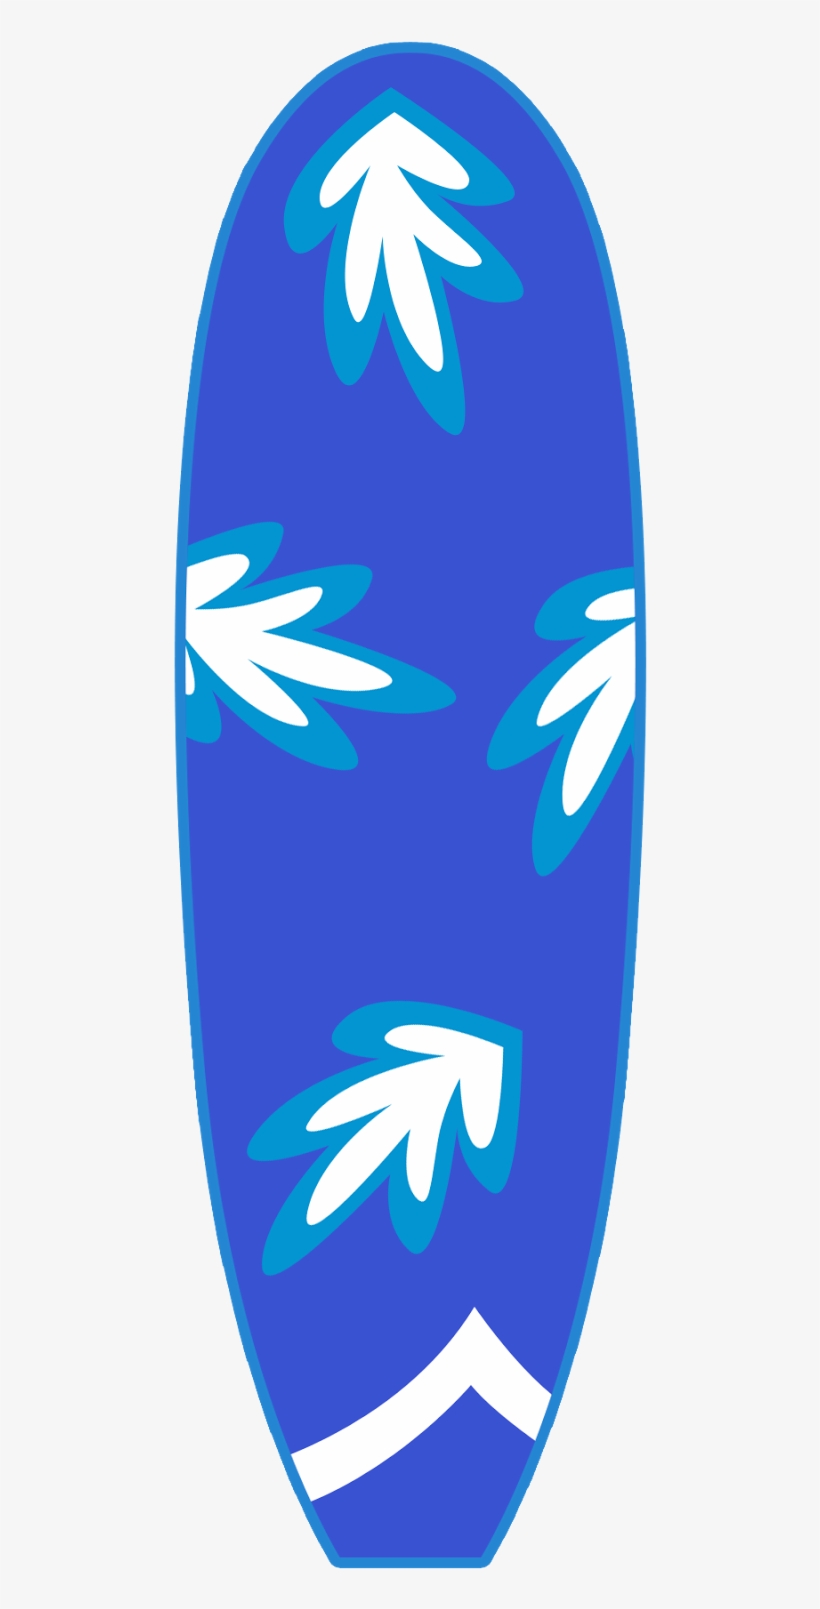 Ibshatqj8nnbla - Angry Birds Surf Board, transparent png #3817089